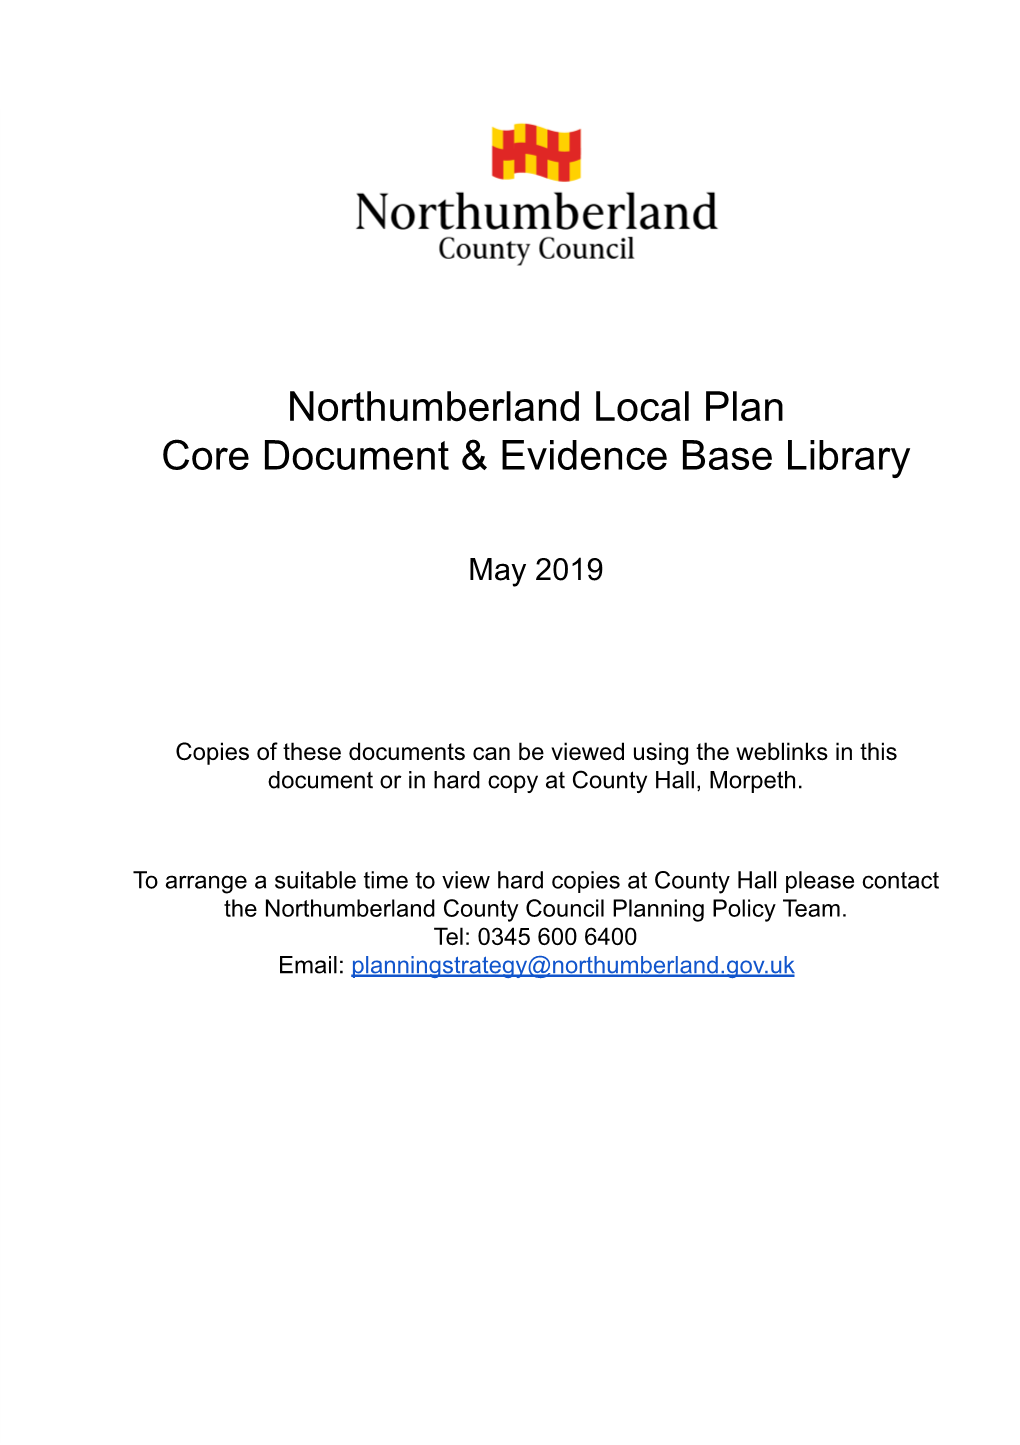 Northumberland Local Plan Core Document & Evidence Base Library